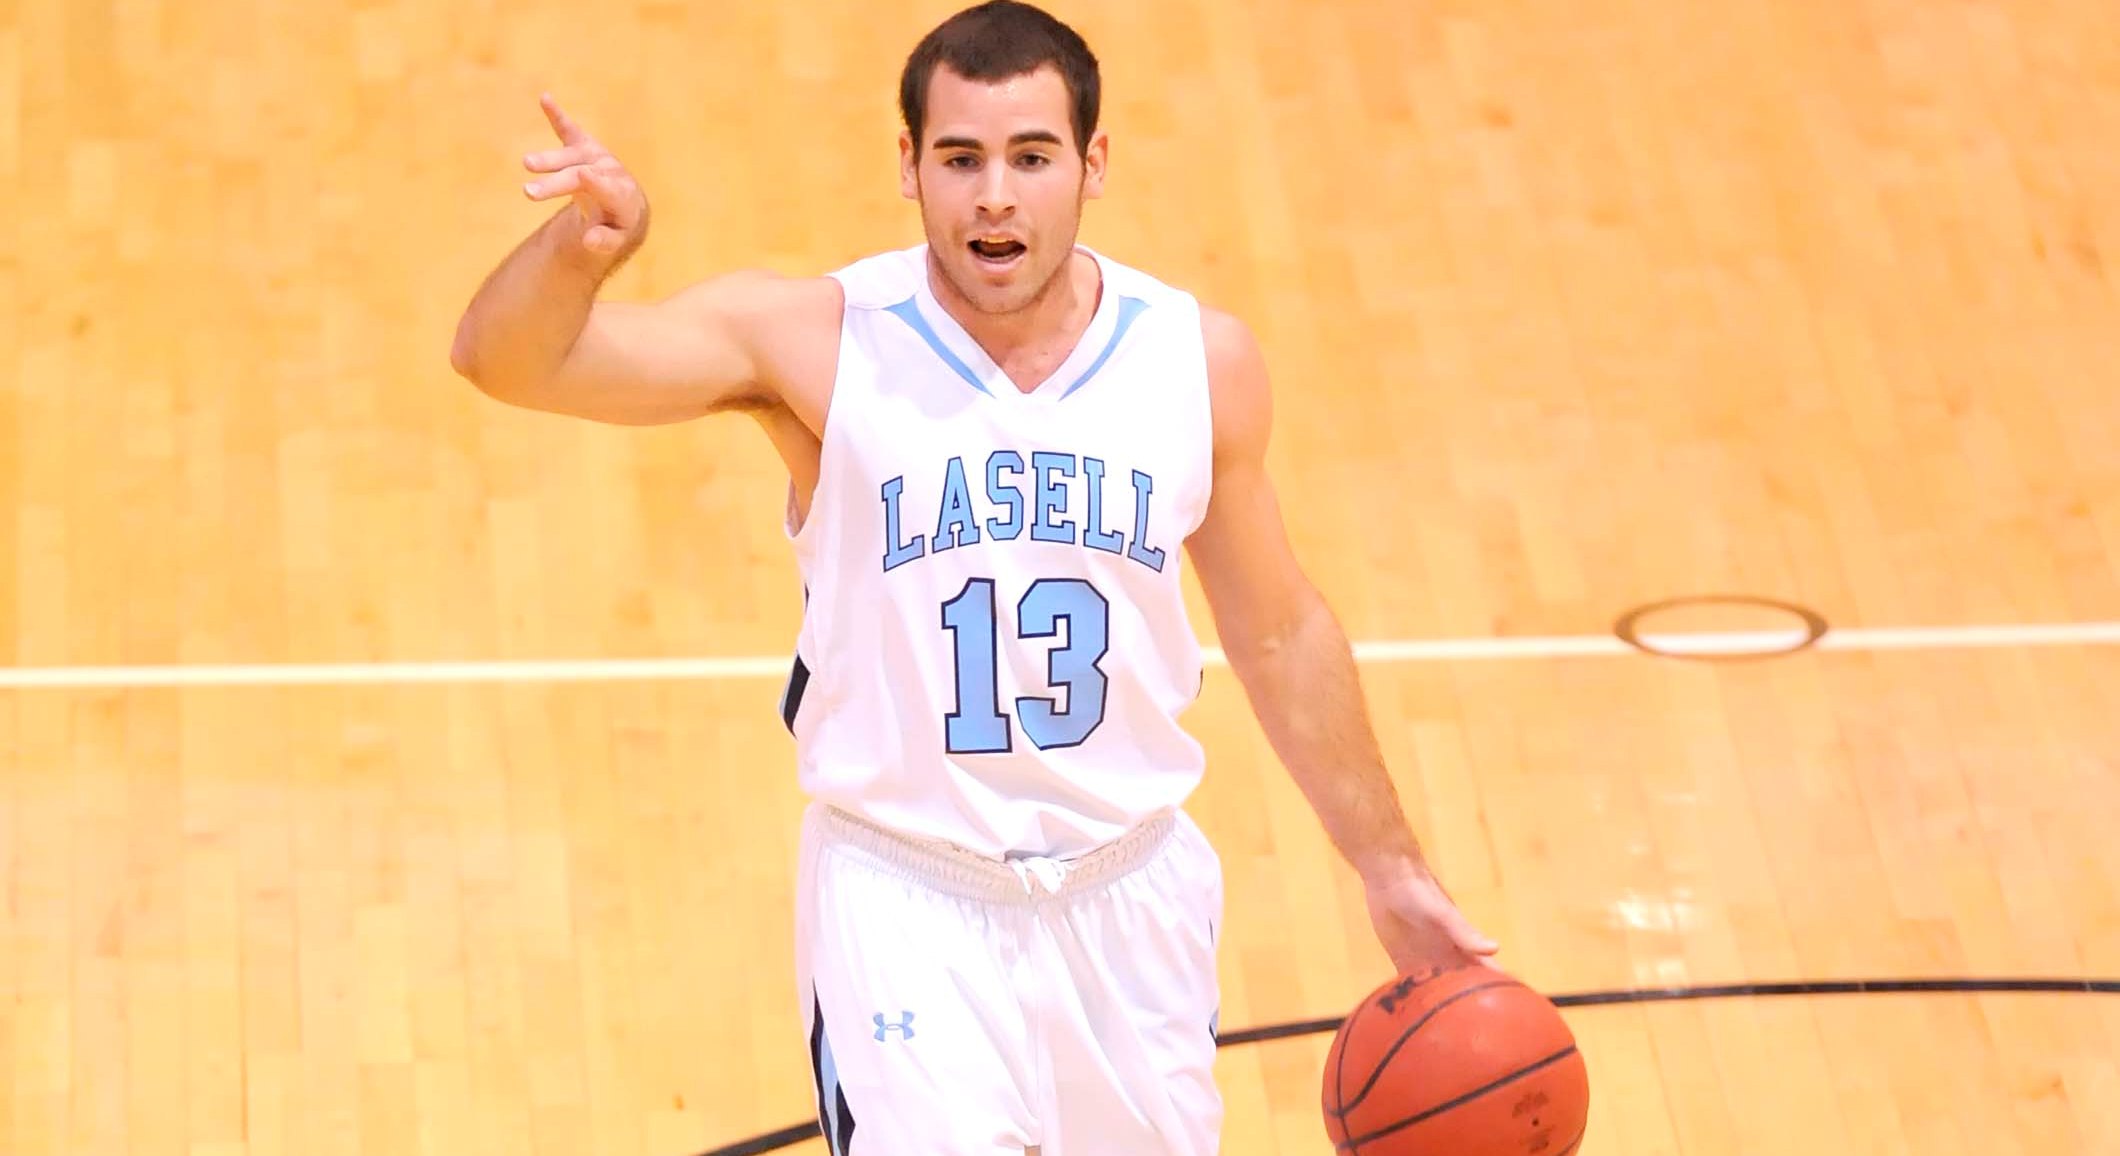 Second Half Run Sends Johnson and Wales Past Lasell in Men's Hoops